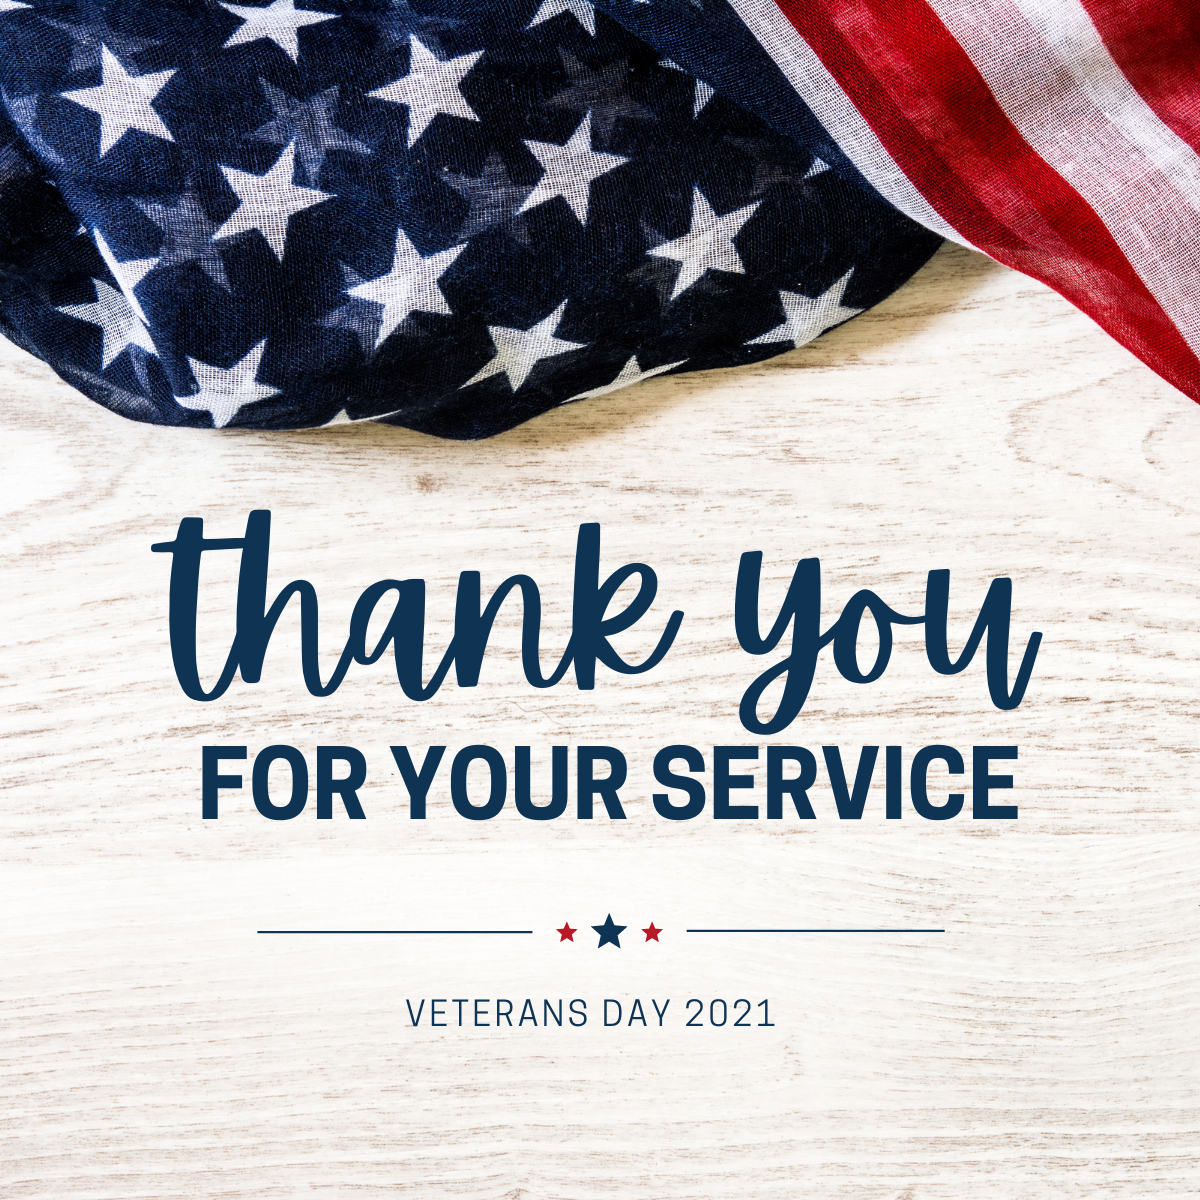 Thank you for your service Veterans Day 2021